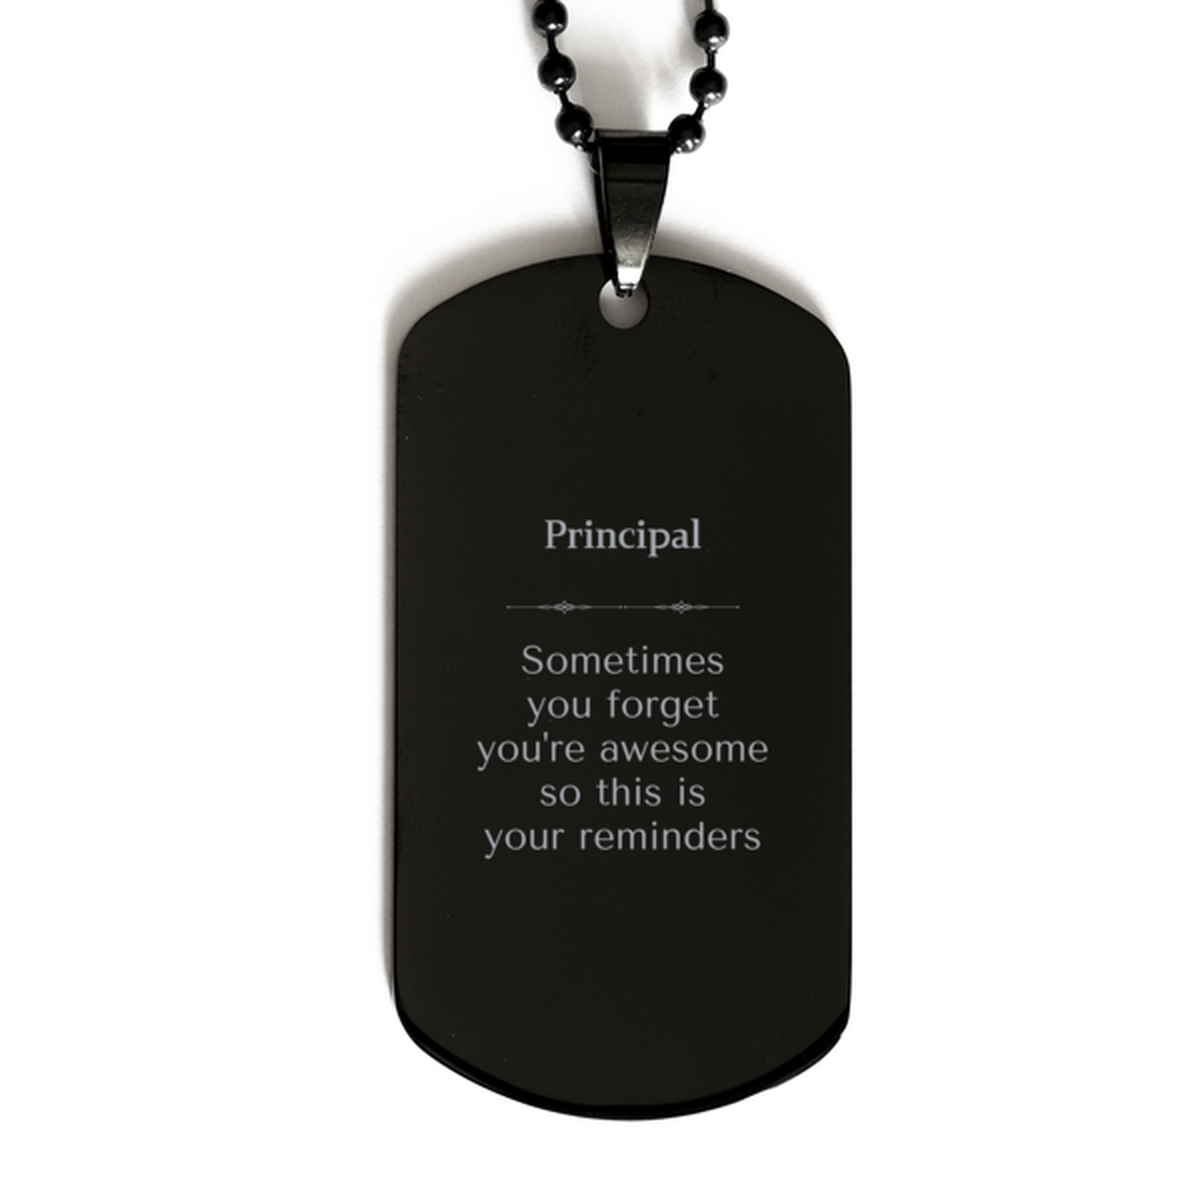 Sentimental Principal Black Dog Tag, Principal Sometimes you forget you're awesome so this is your reminders, Graduation Christmas Birthday Gifts for Principal, Men, Women, Coworkers